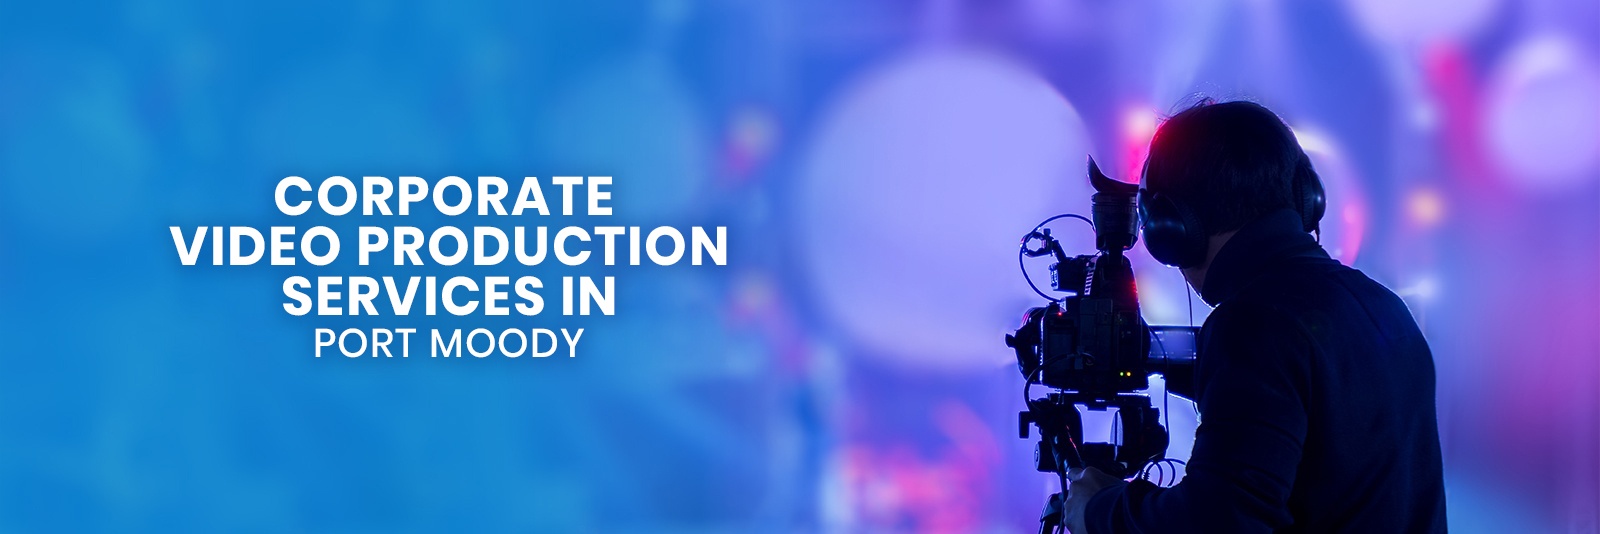 Video Production Services In Port Moody